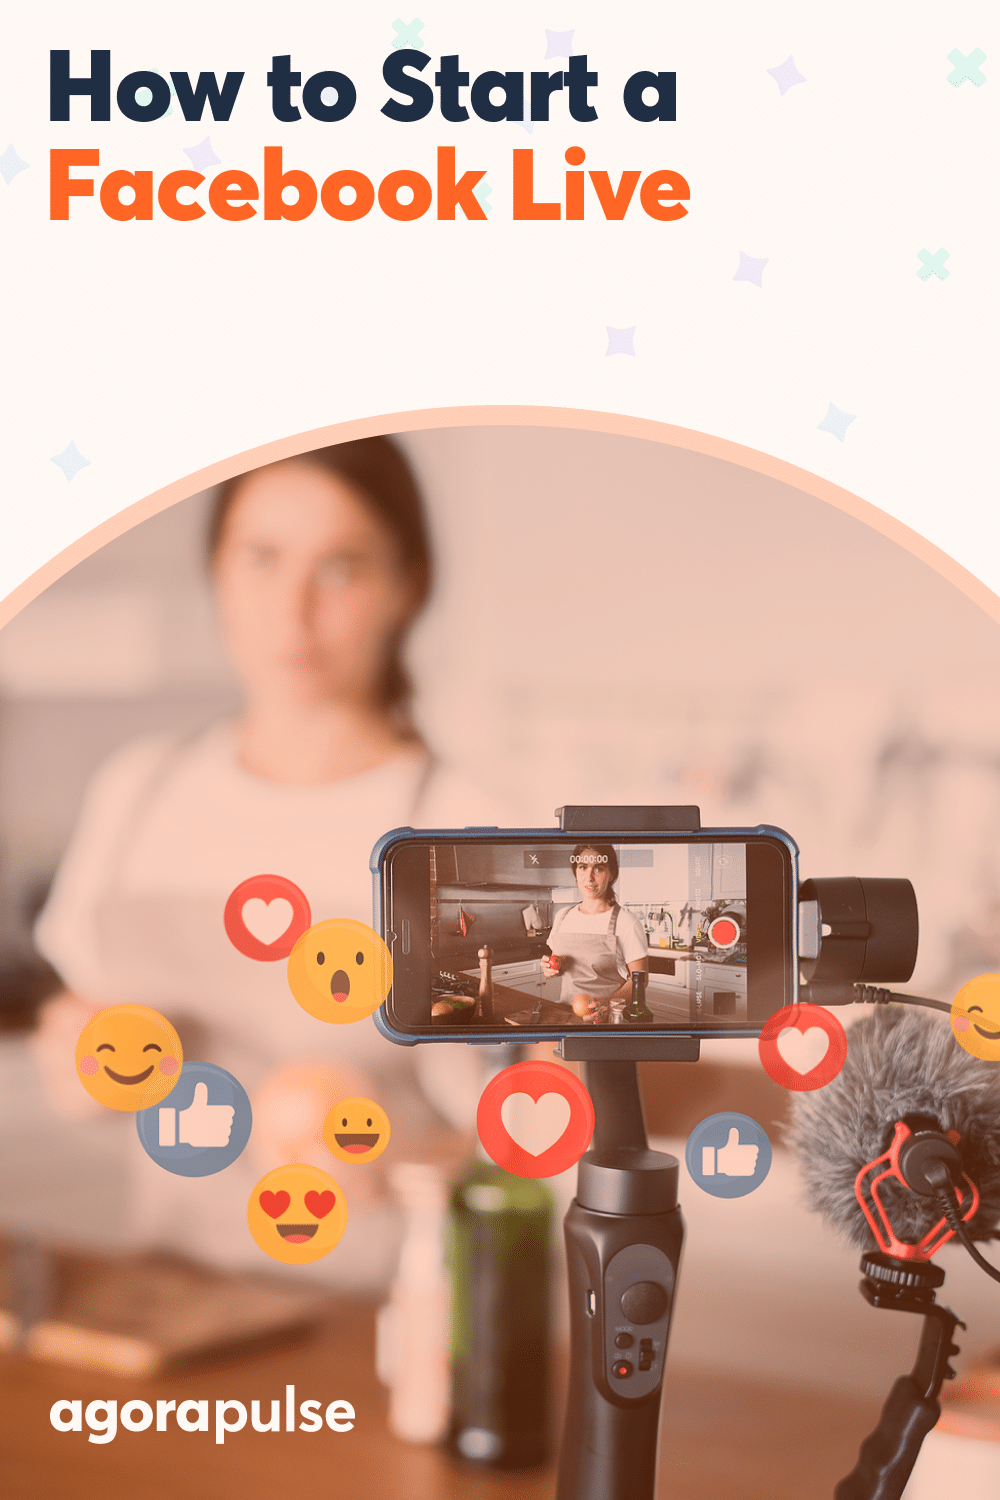 How to Start a Facebook Live: Tips for Before, During, and After Your Broadcast